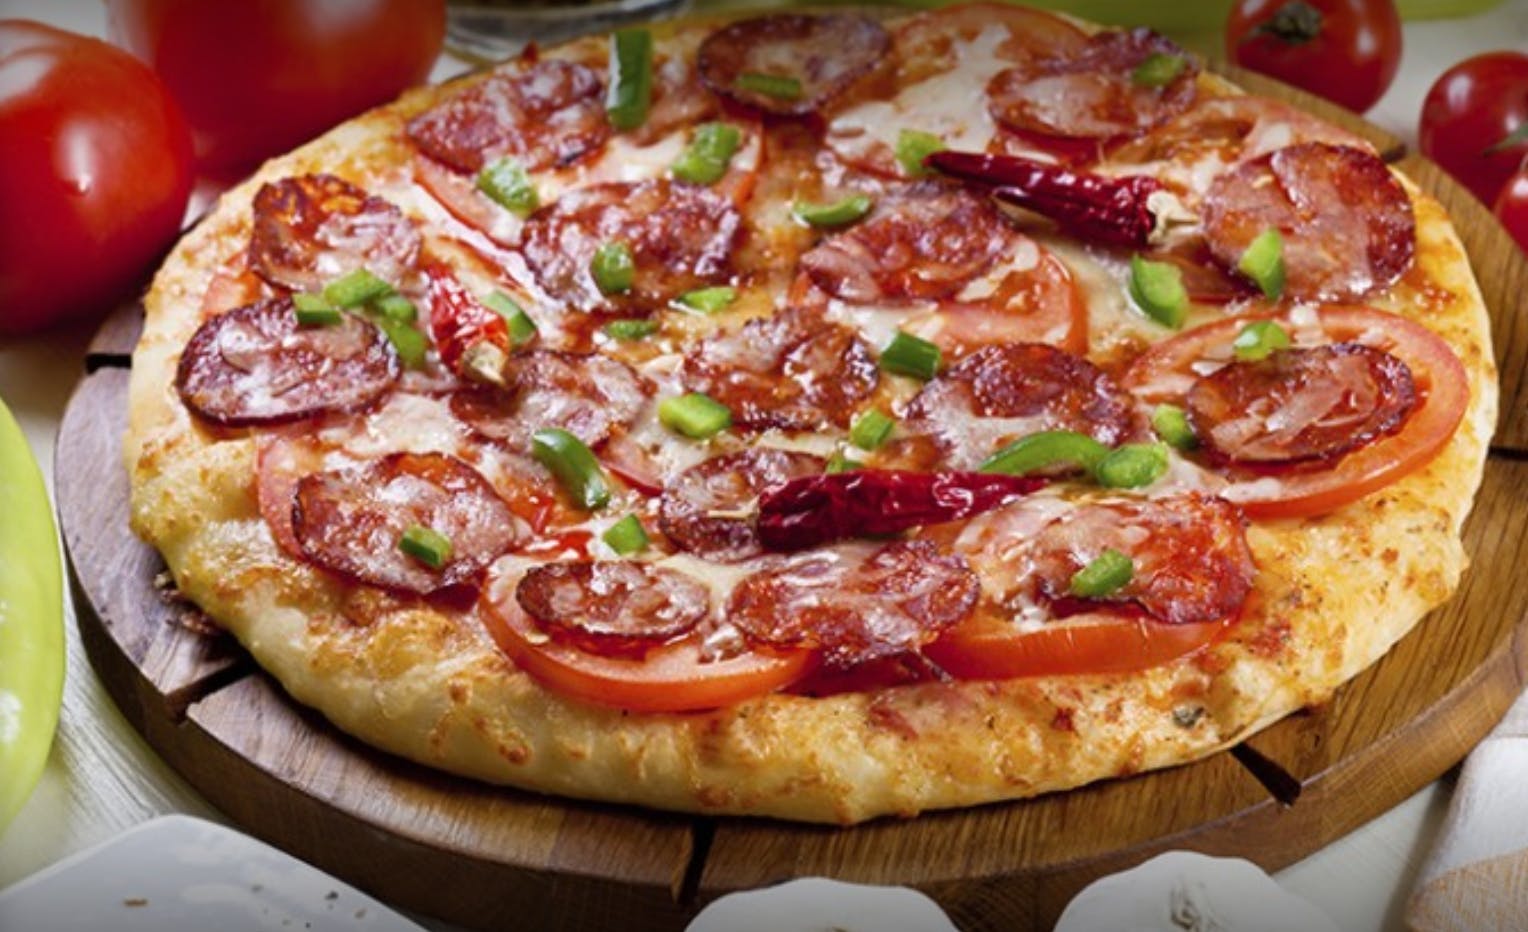 Pizza Business for Sale in Thornton Colorado makes $95,000!